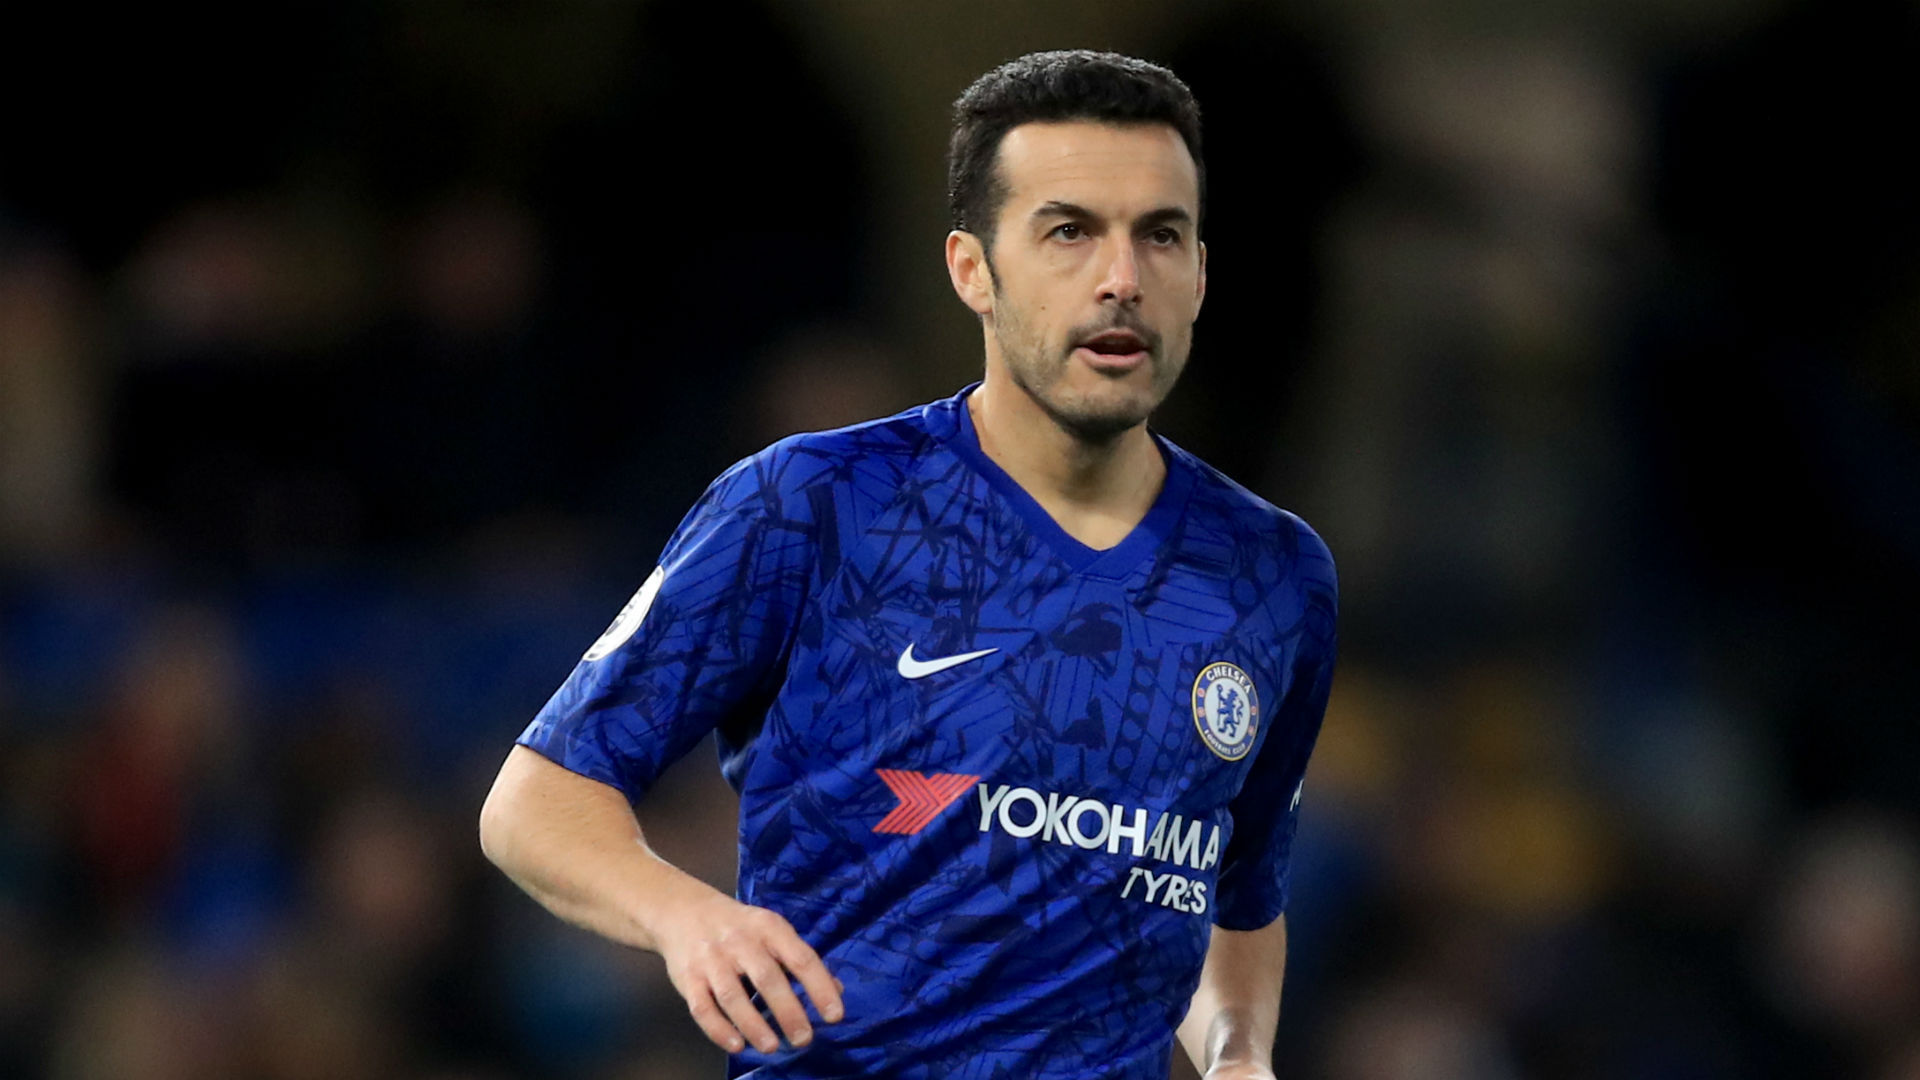 After spending five years at Stamford Bridge, Pedro has confirmed his time with Chelsea is up in an Instagram post.